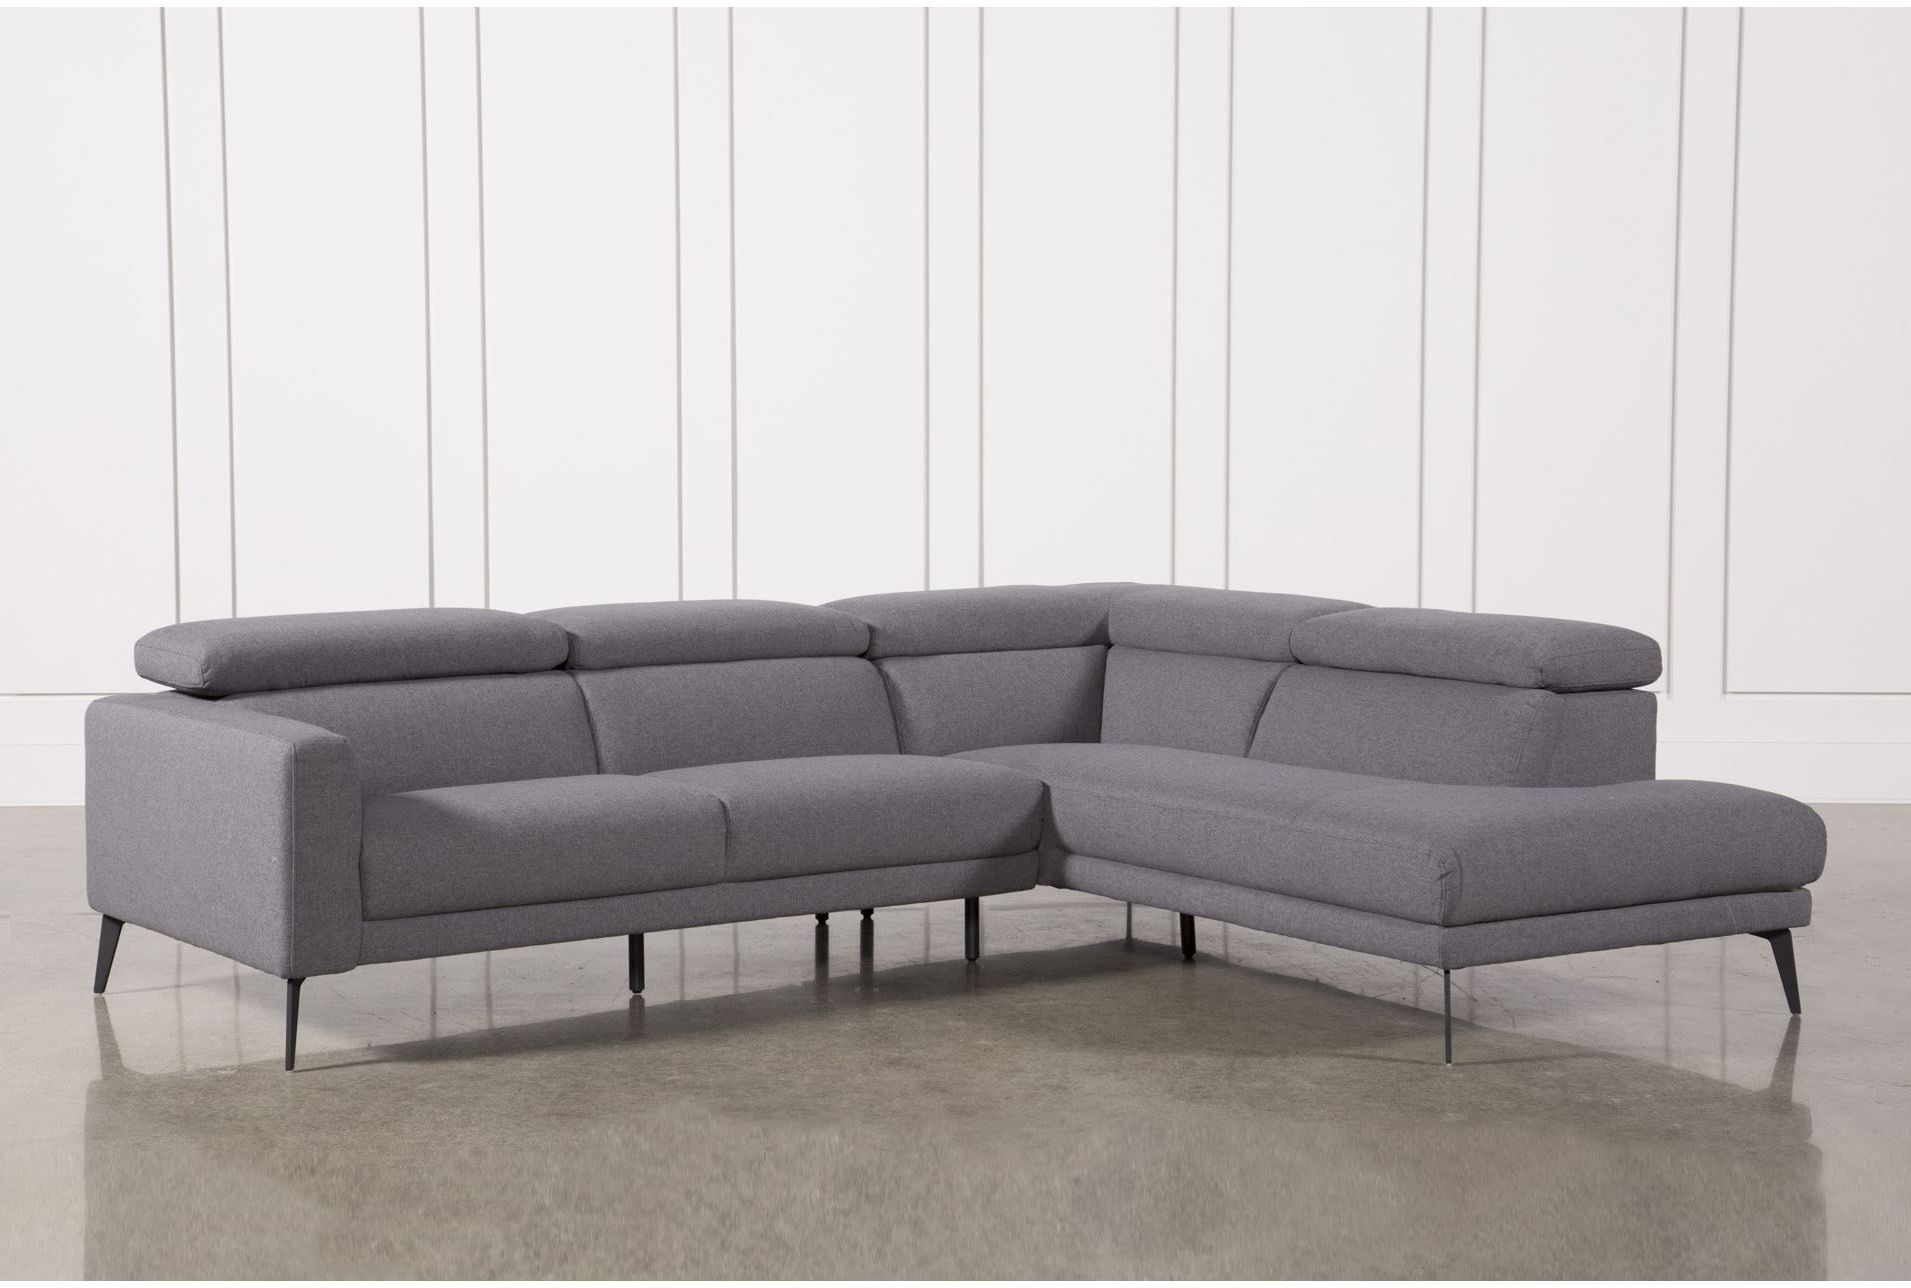 Trendy Tatum Dark Grey 2 Piece Sectionals With Raf Chaise Intended For Neo Grey 2 Piece Sectional W/laf Chaise (View 1 of 20)